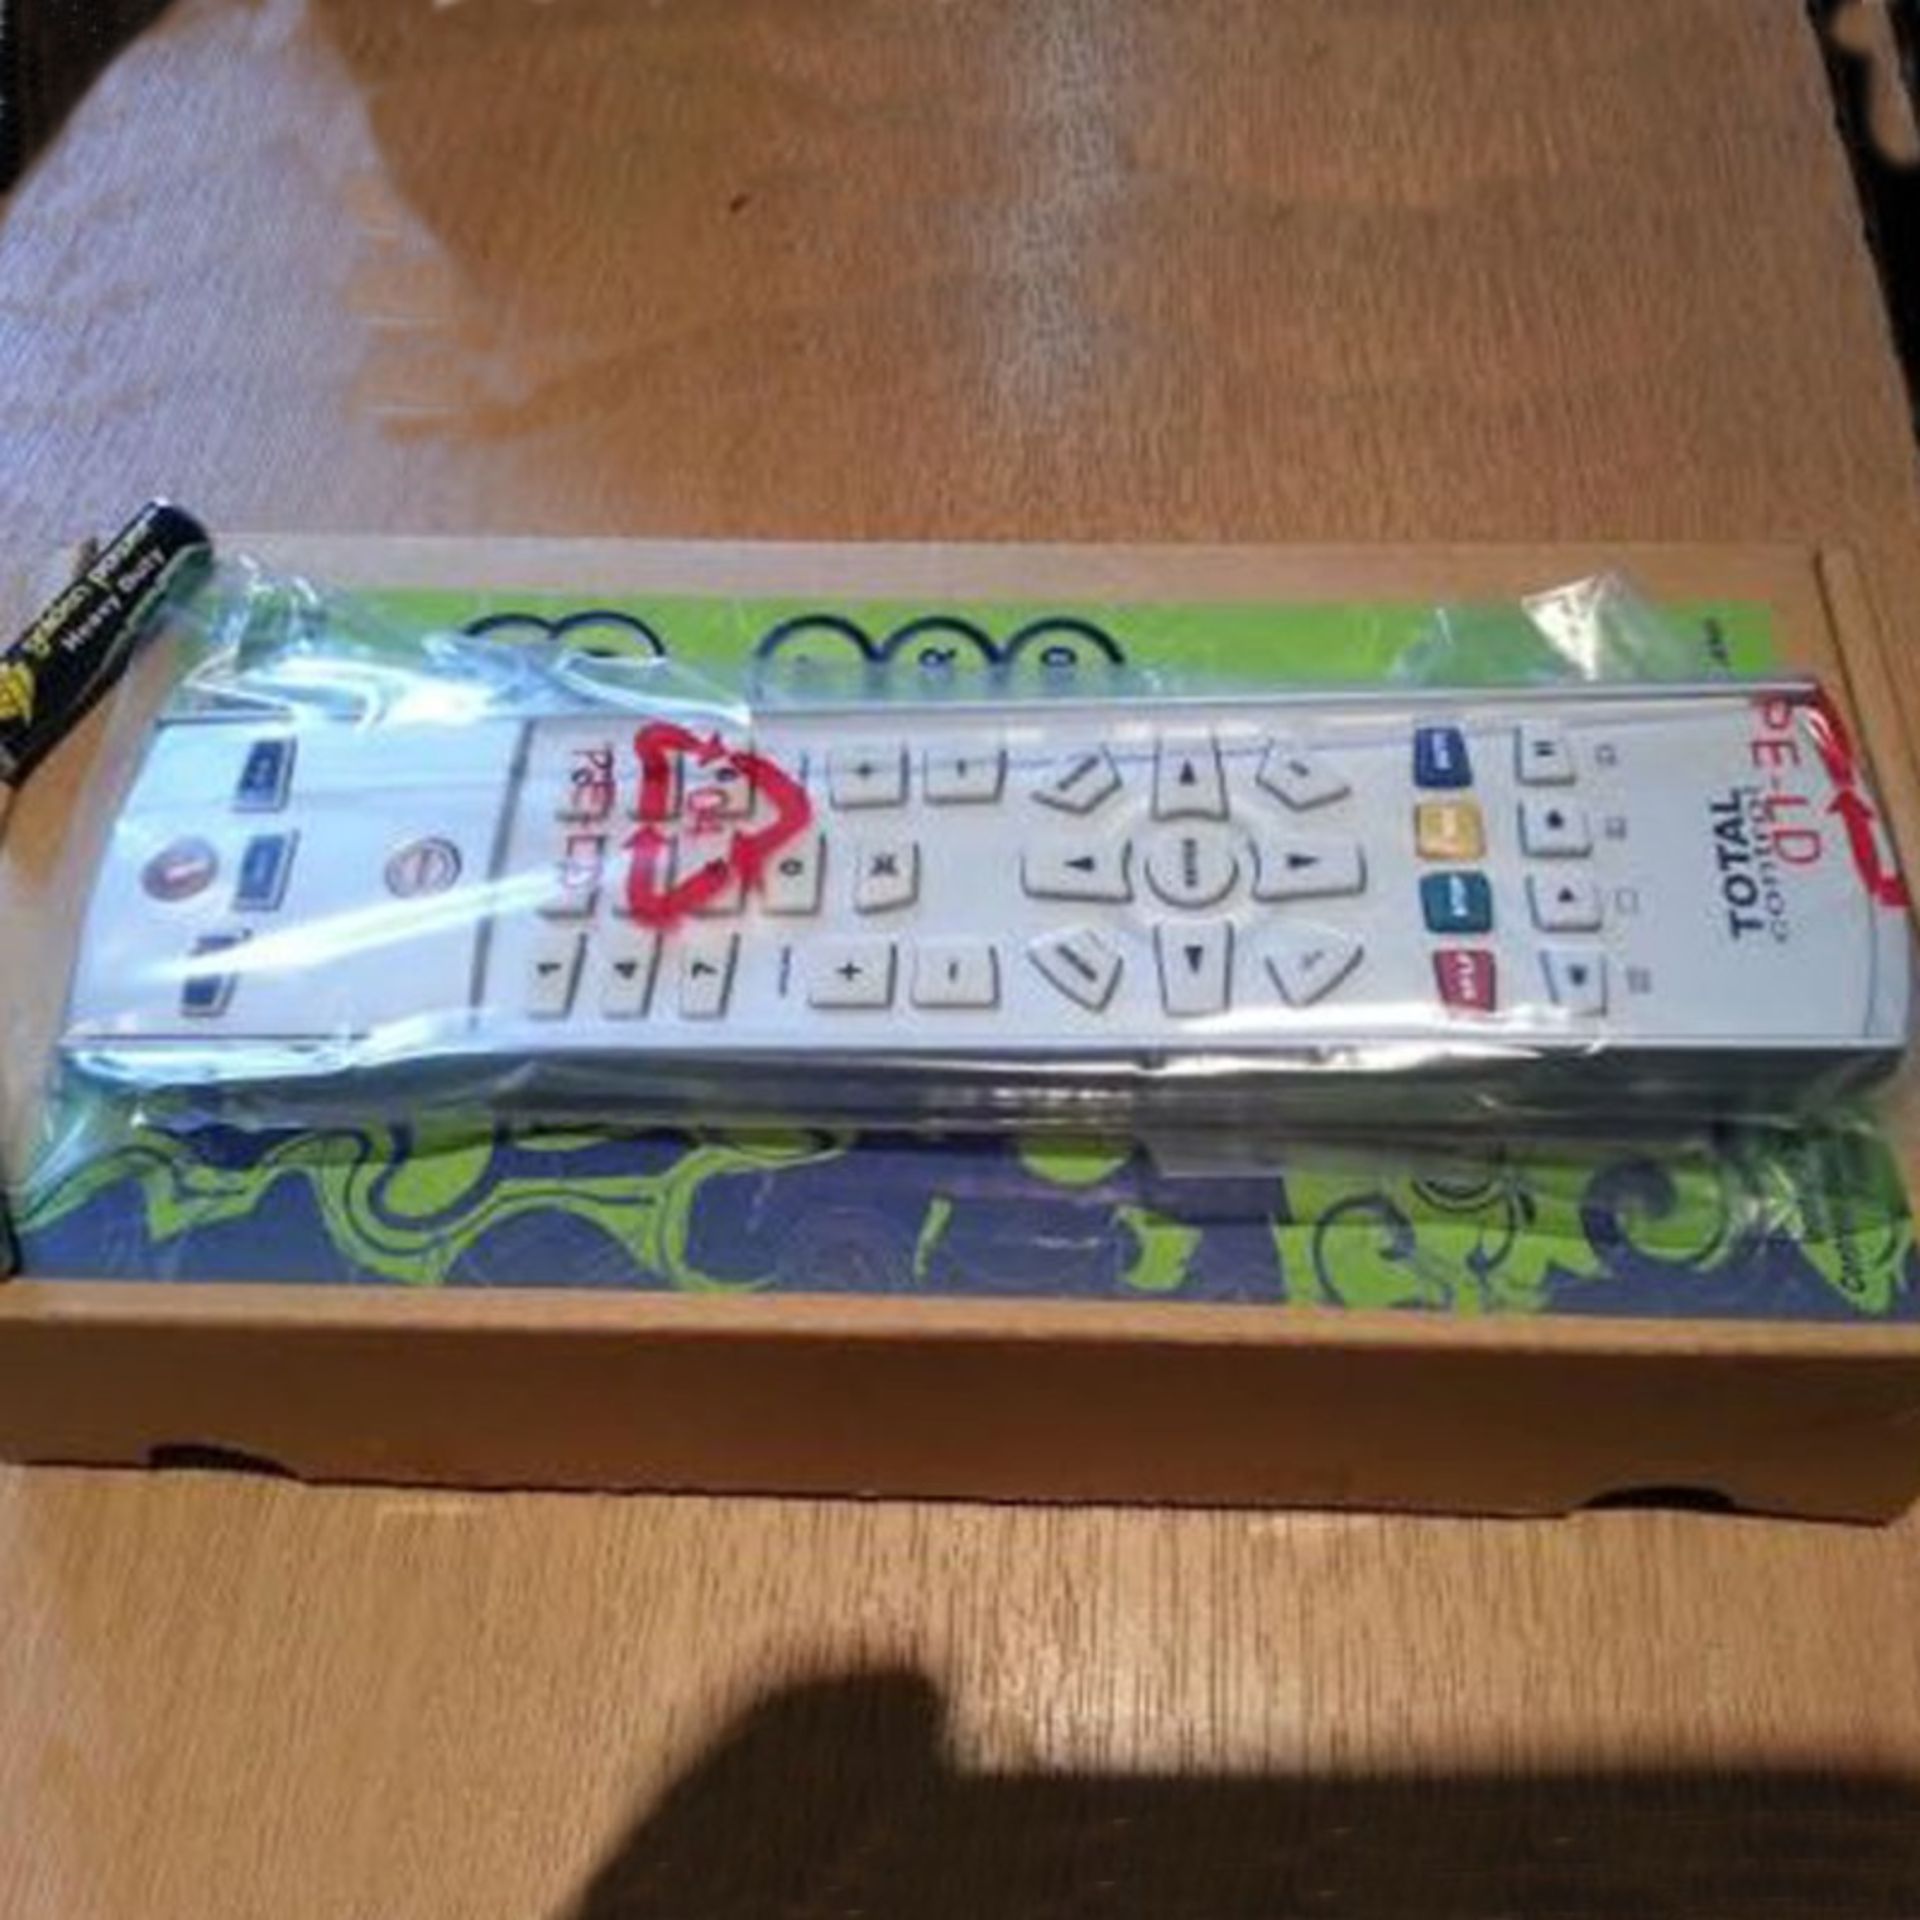 V Brand New Total control universal remote control/ Contros l up to three devices from one remote